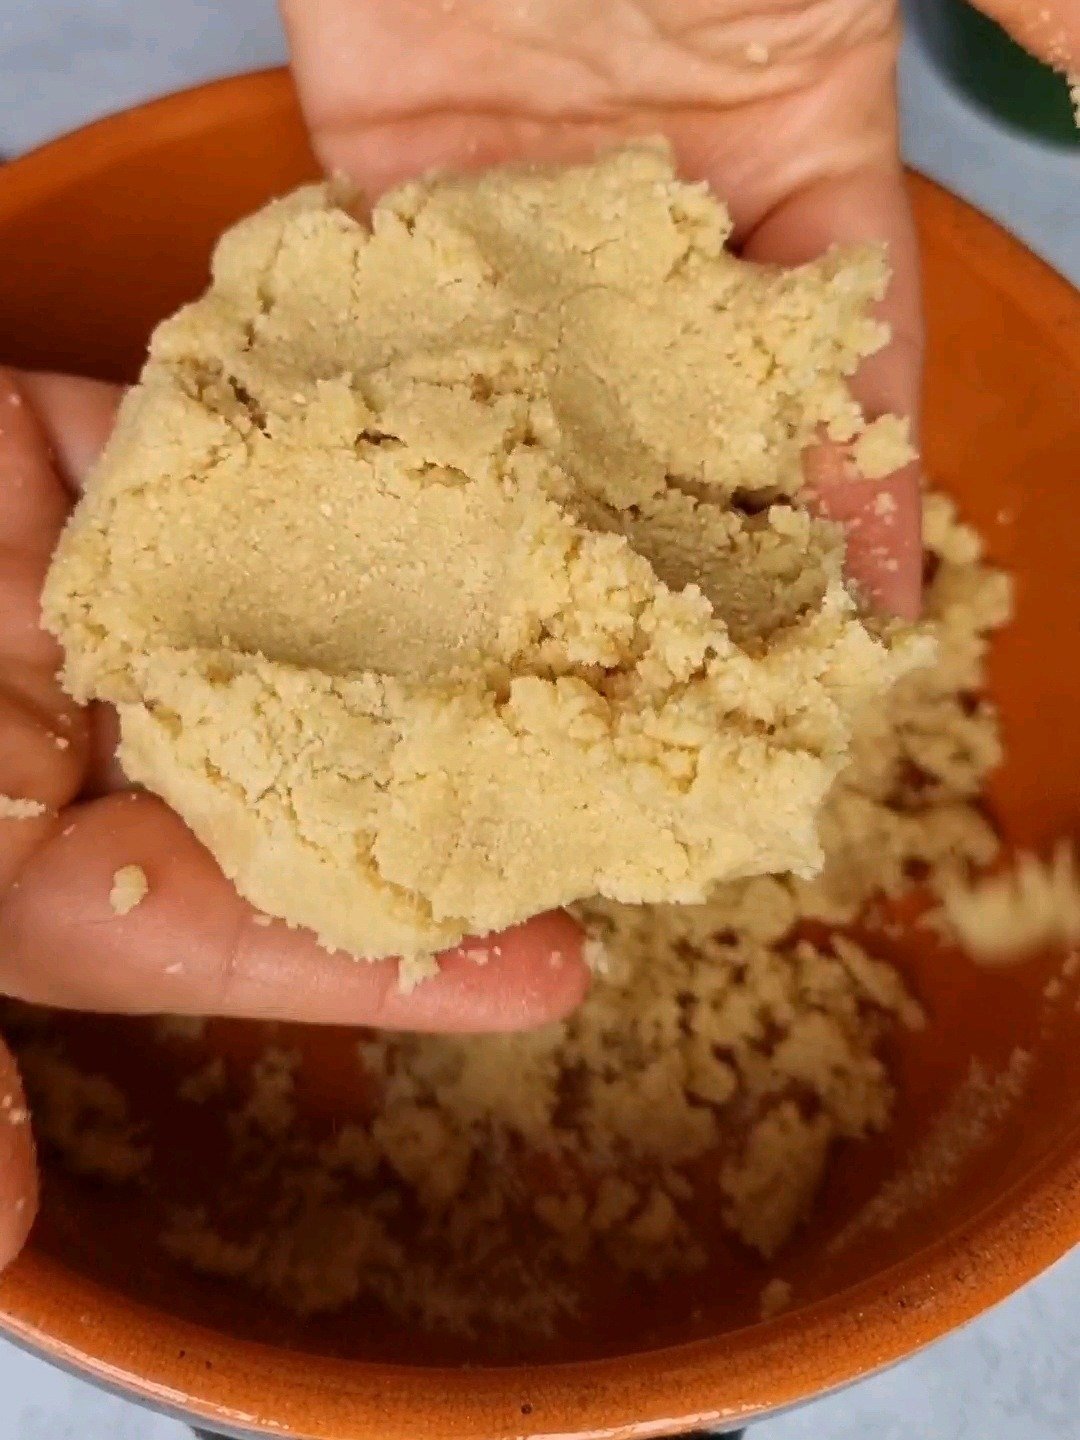 The perfect consistency for almond flour, peanut butter, and ghee mixture.